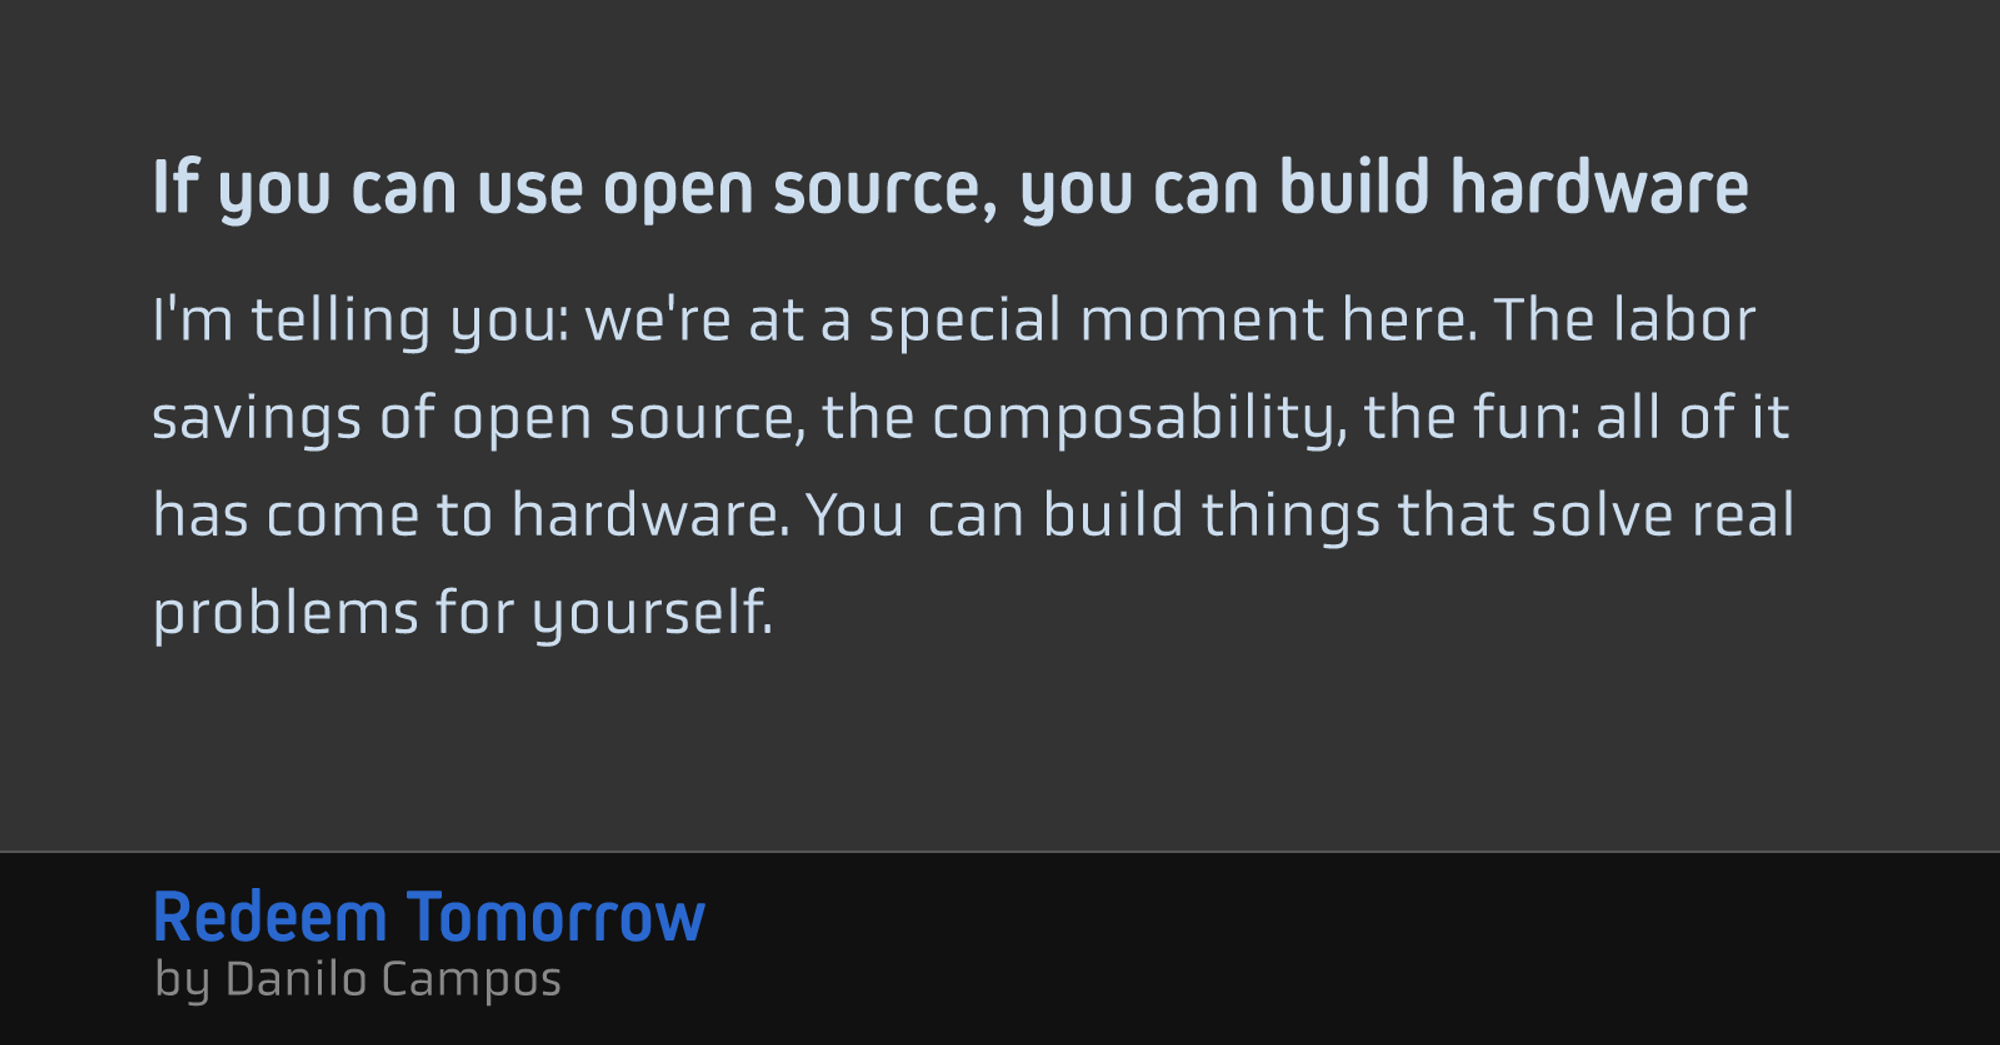 If you can use open source, you can build hardware